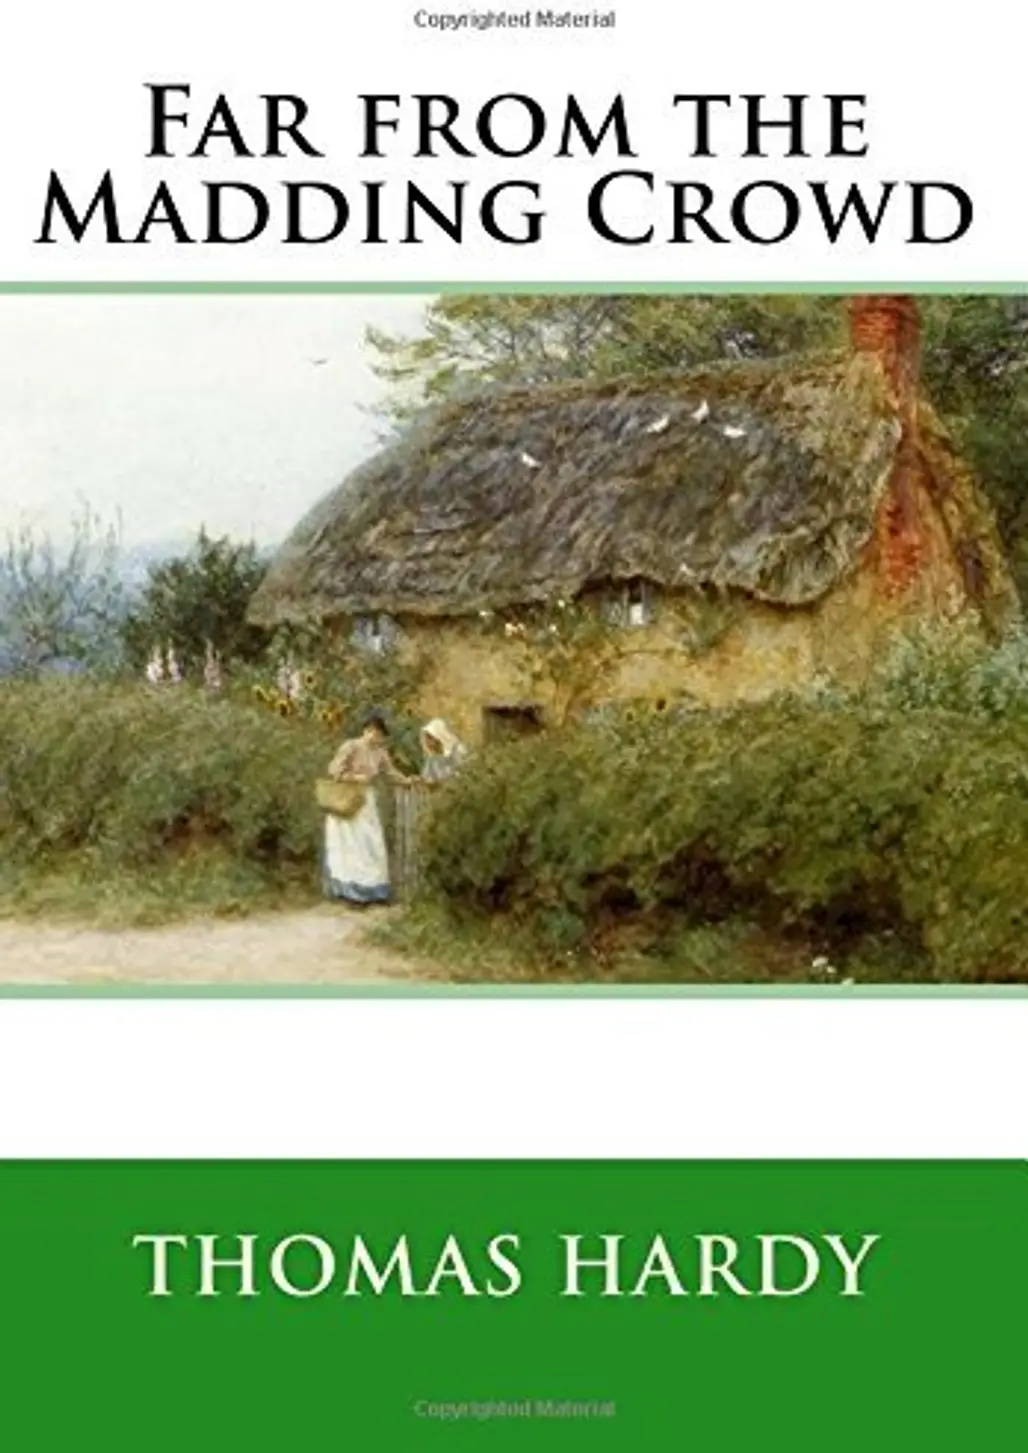 Far from the Madding Crowd – Thomas Hardy